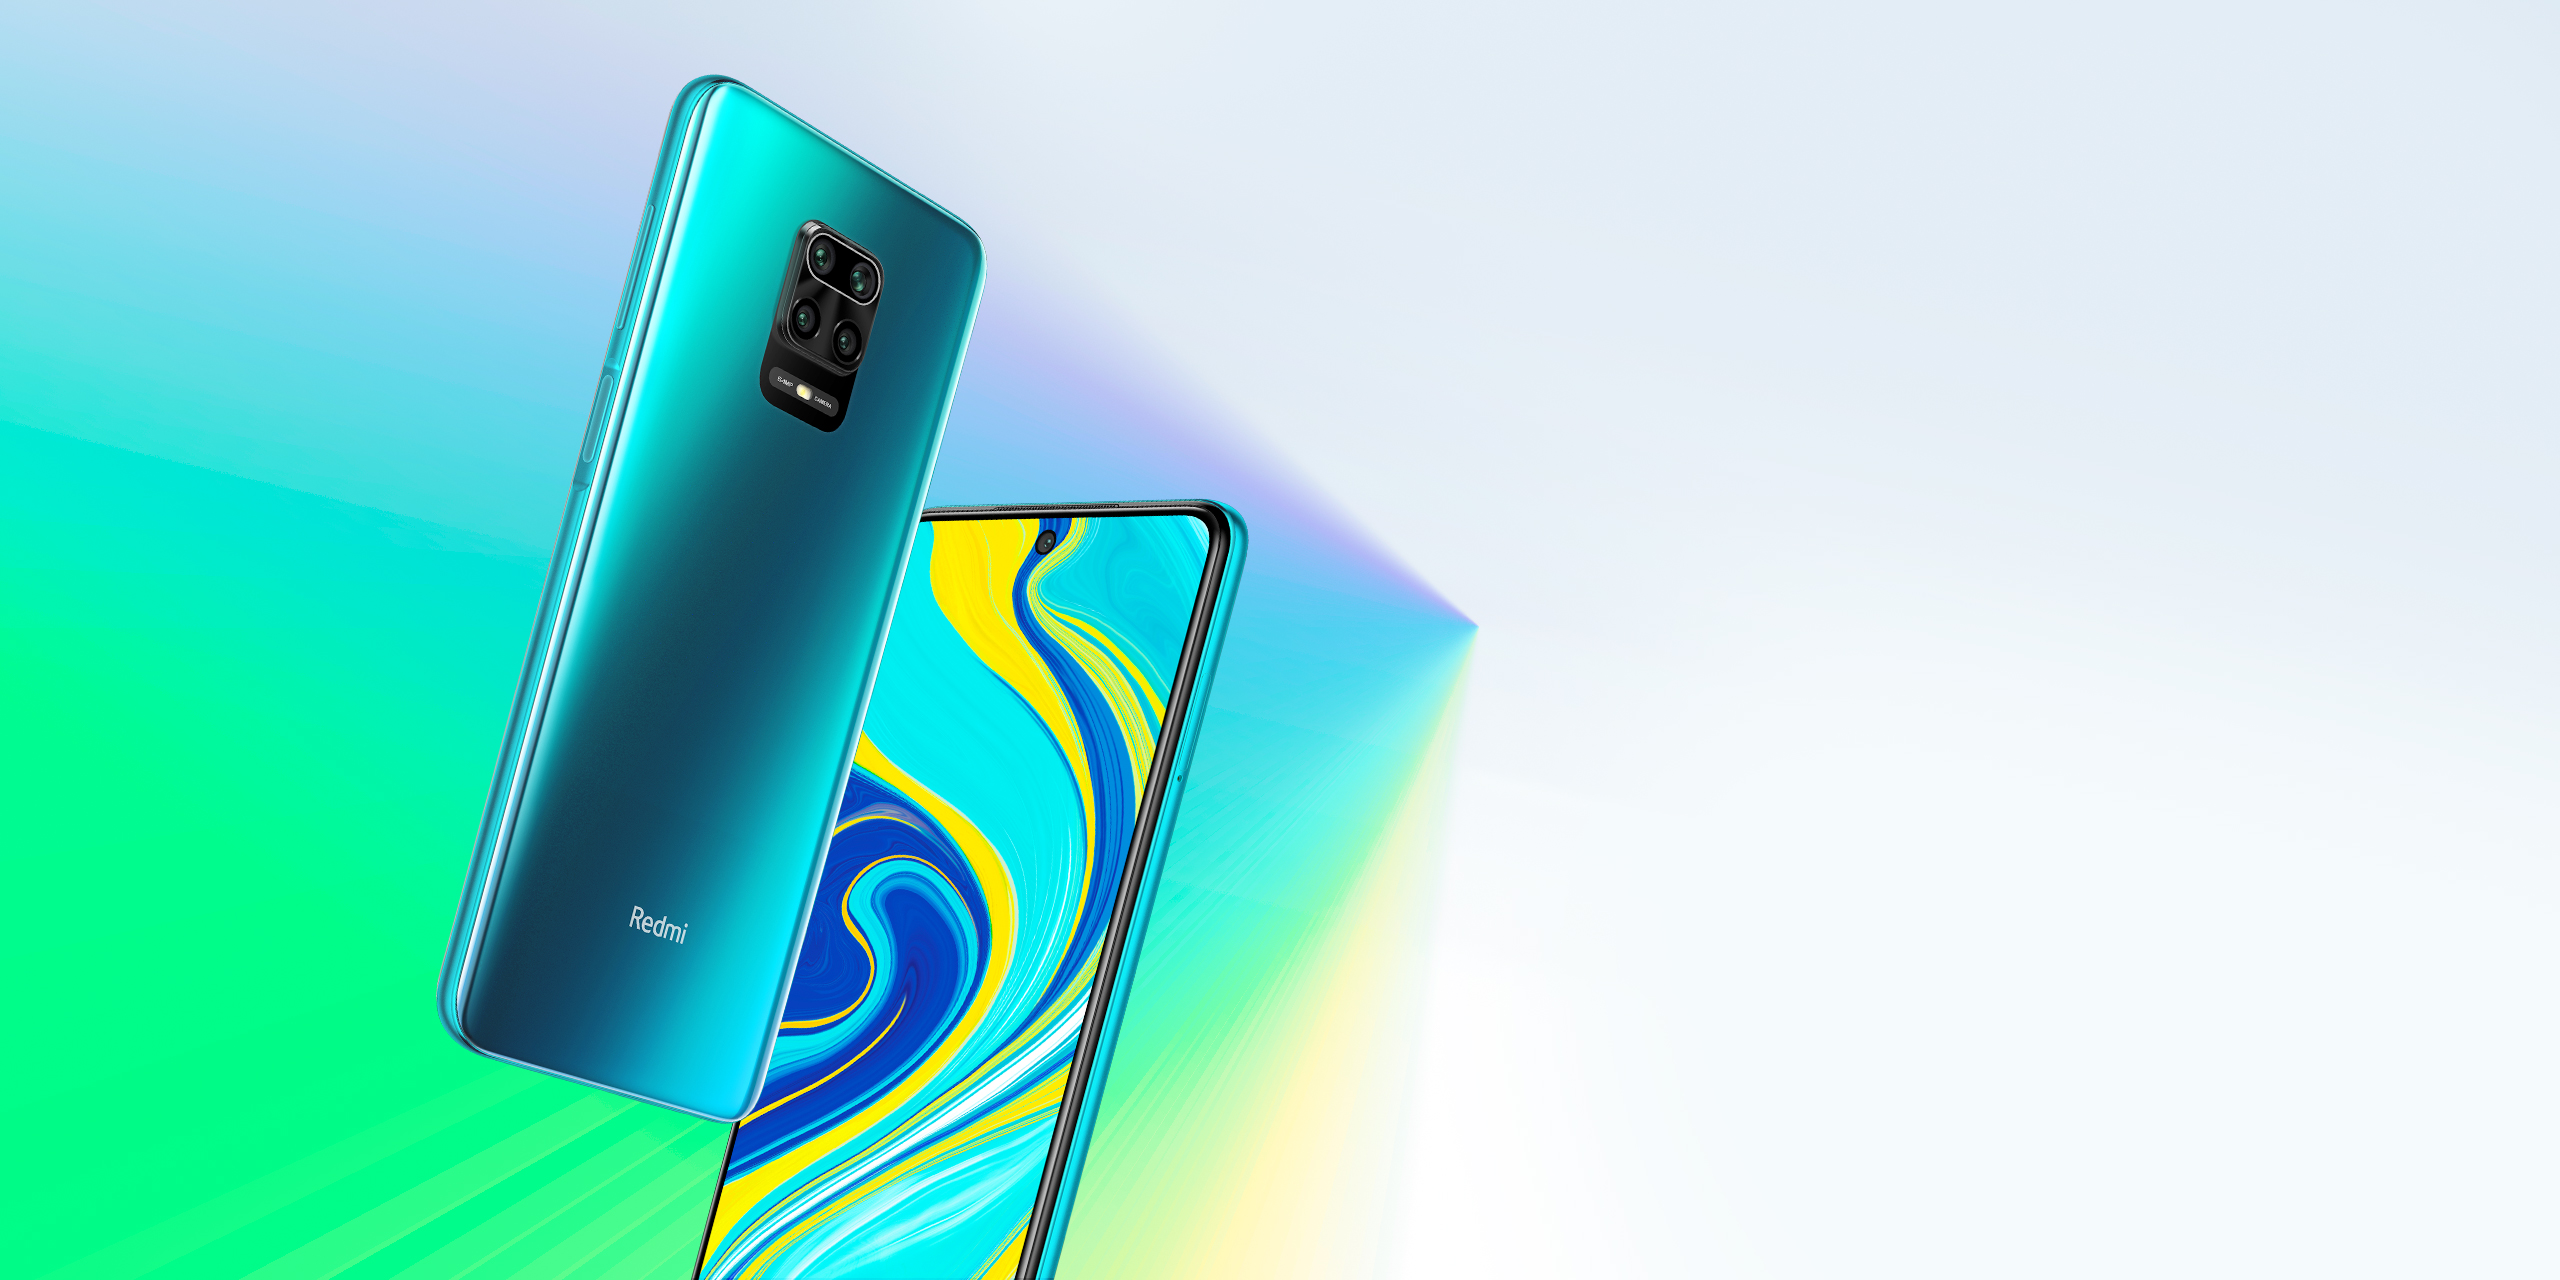 Redmi Note 9S Specifications, Price in India